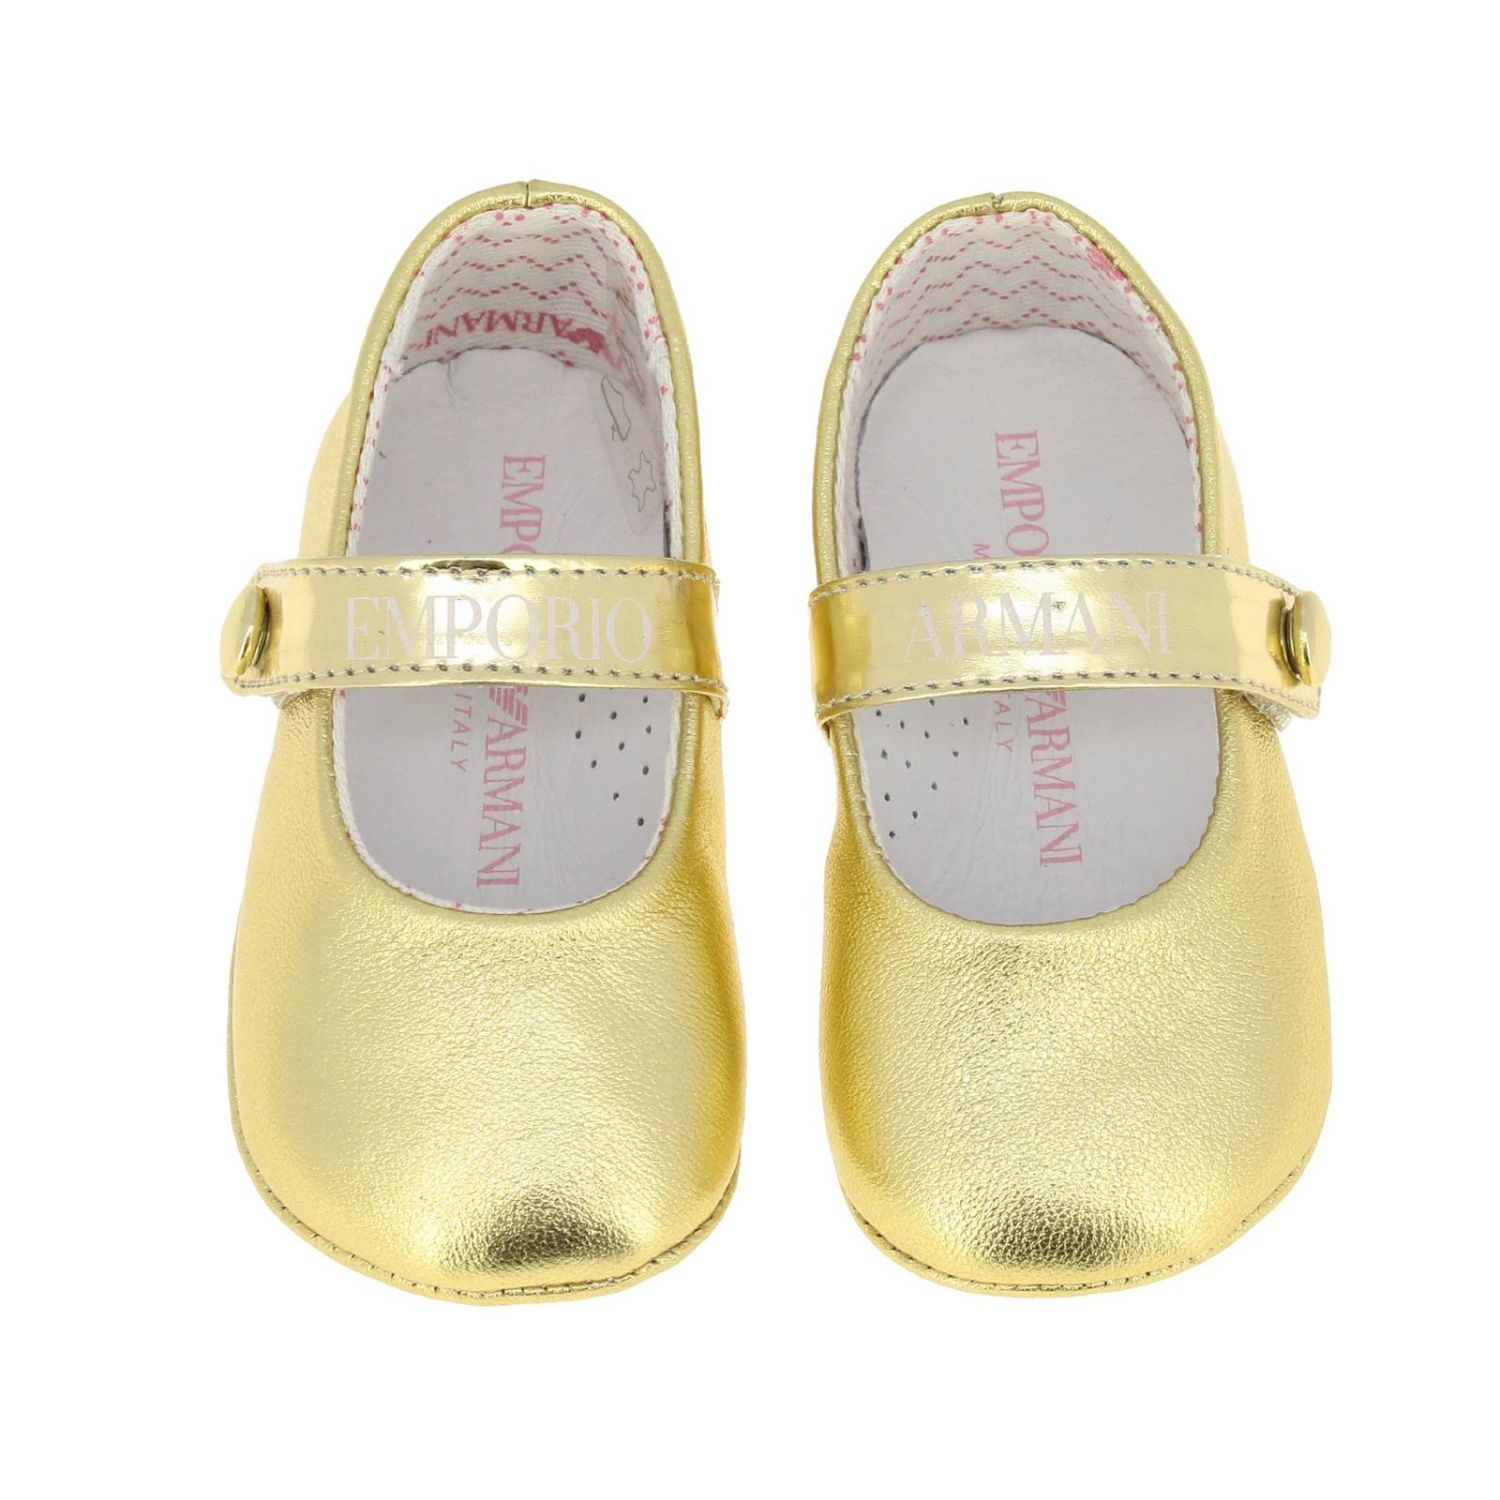 Emporio Armani Outlet: shoes for baby - Gold | Emporio Armani shoes ...